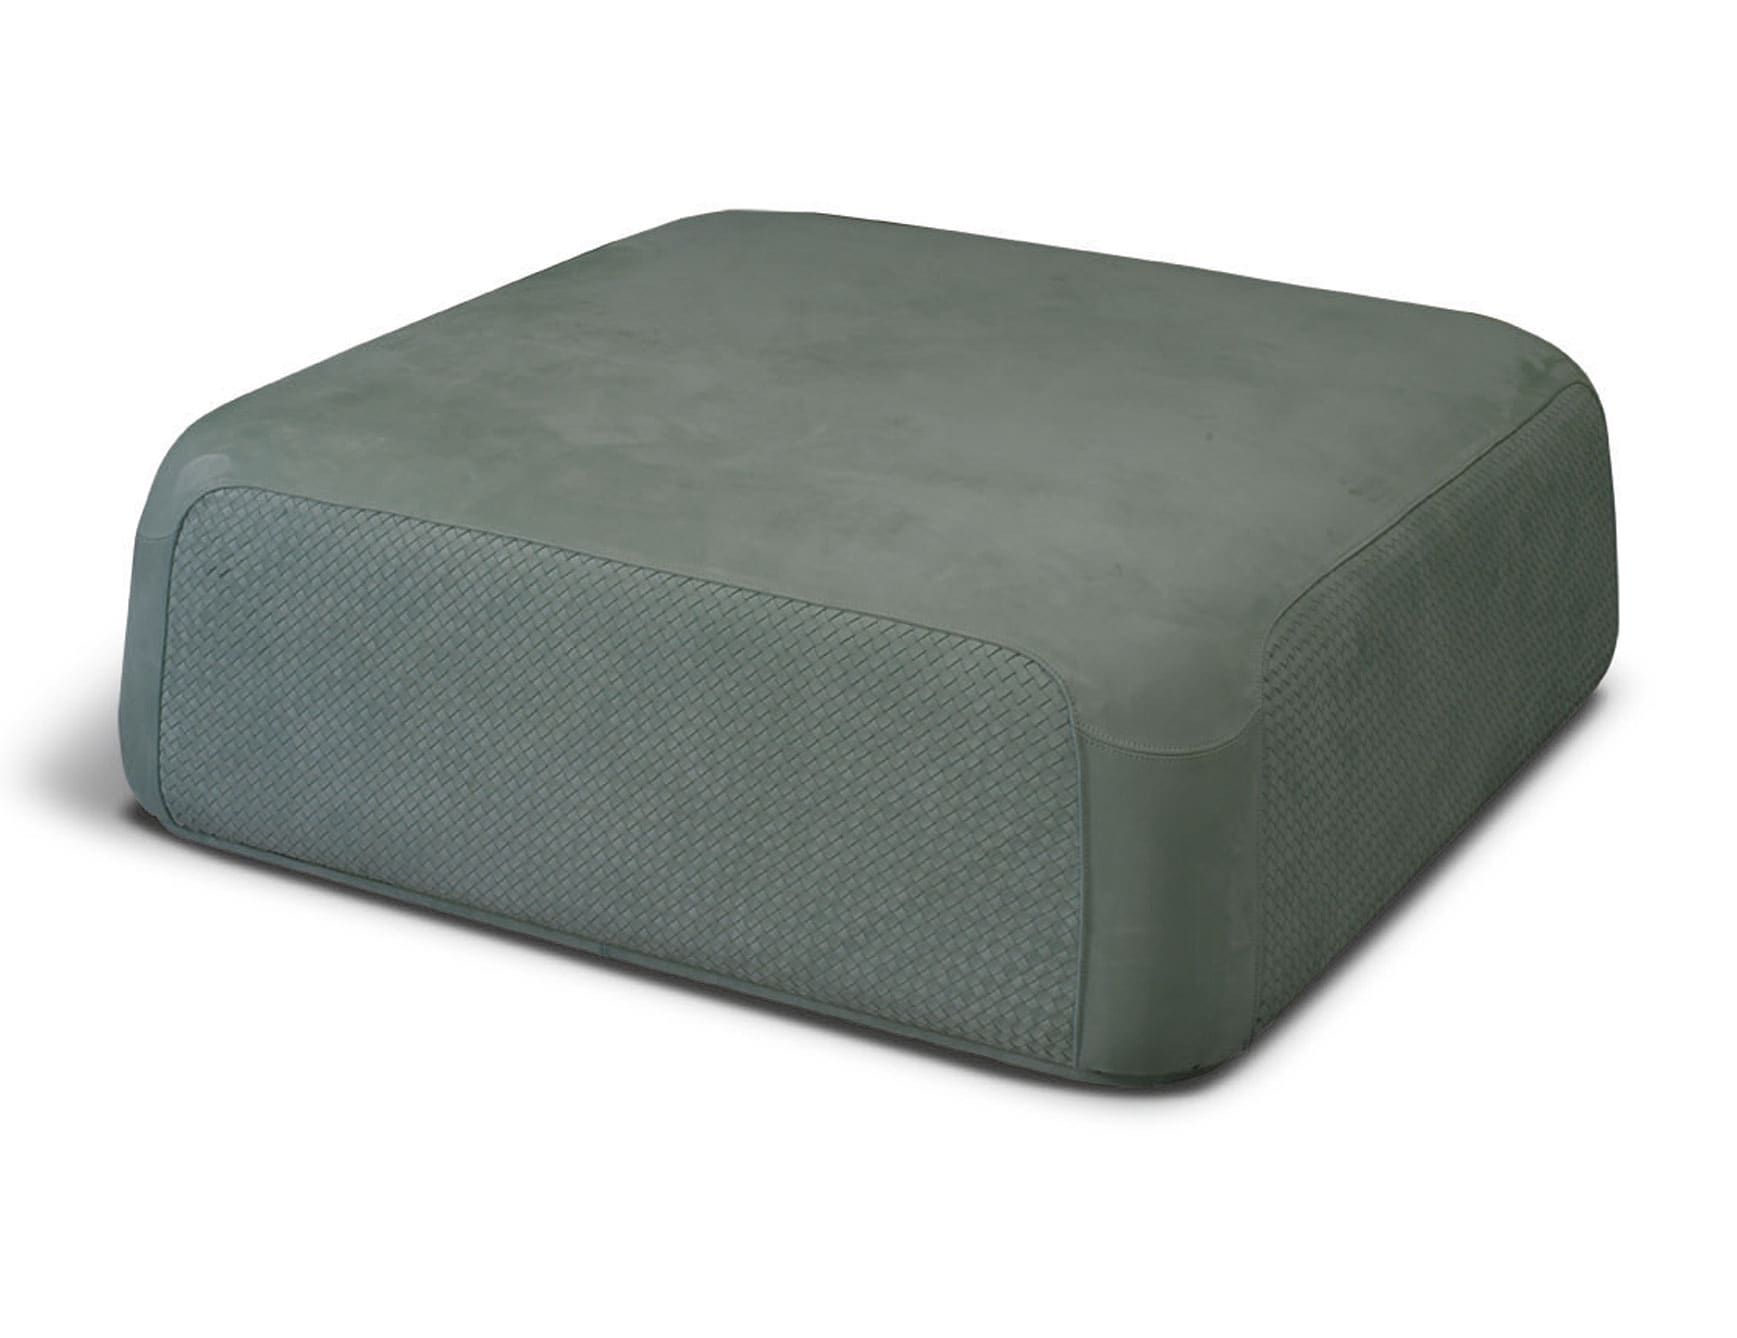 Olivia modern Italian pouf with green leather